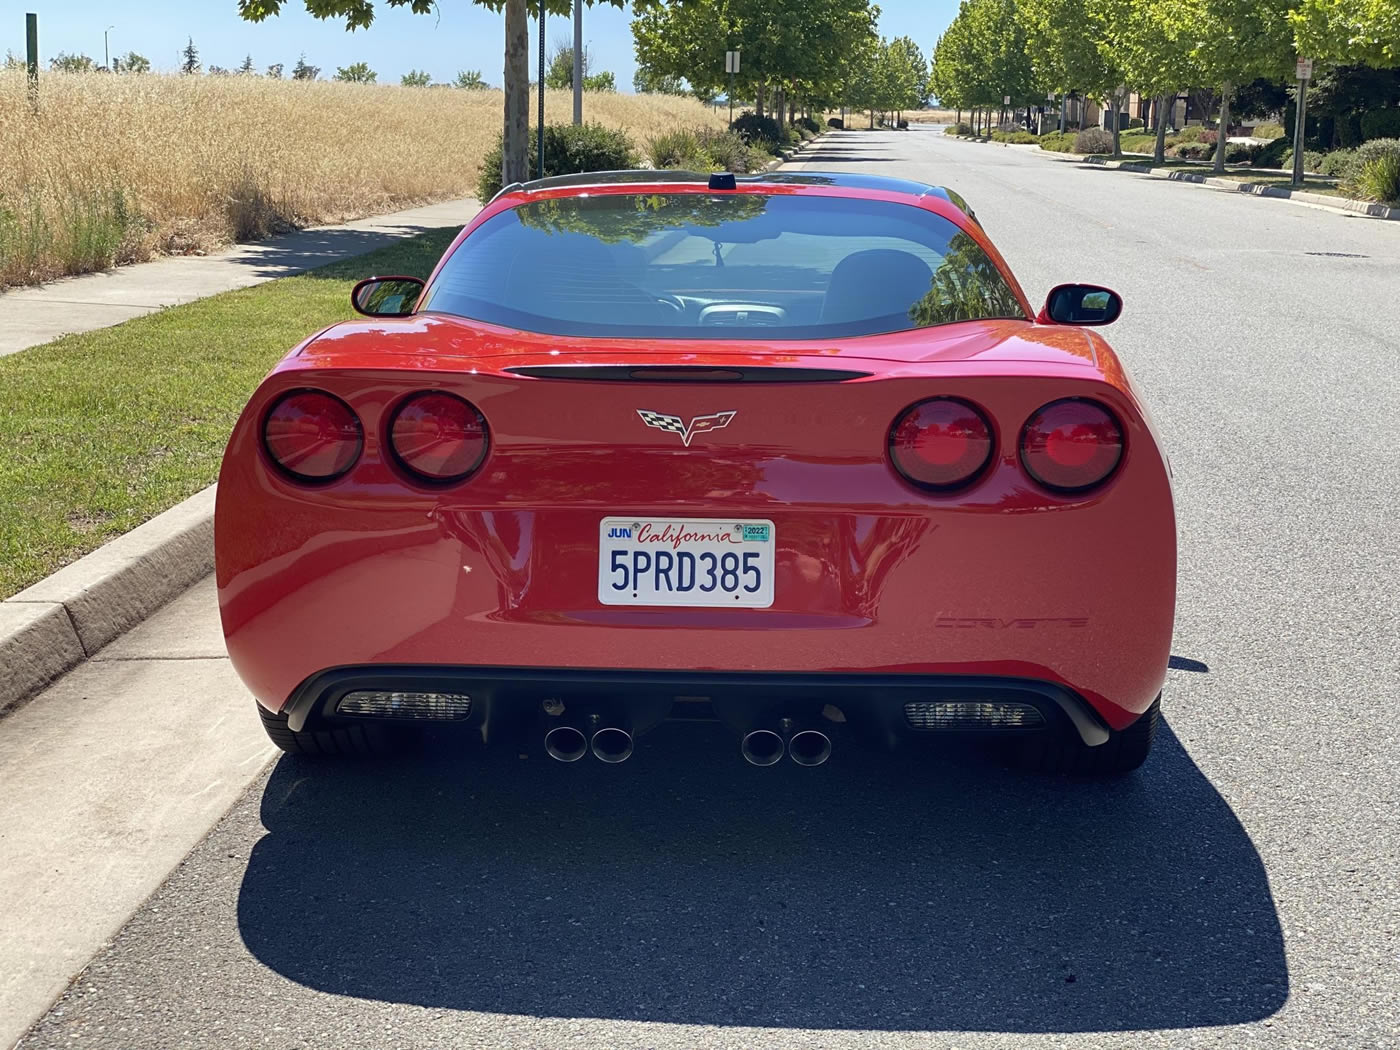 2005 Corvette in Victory Red